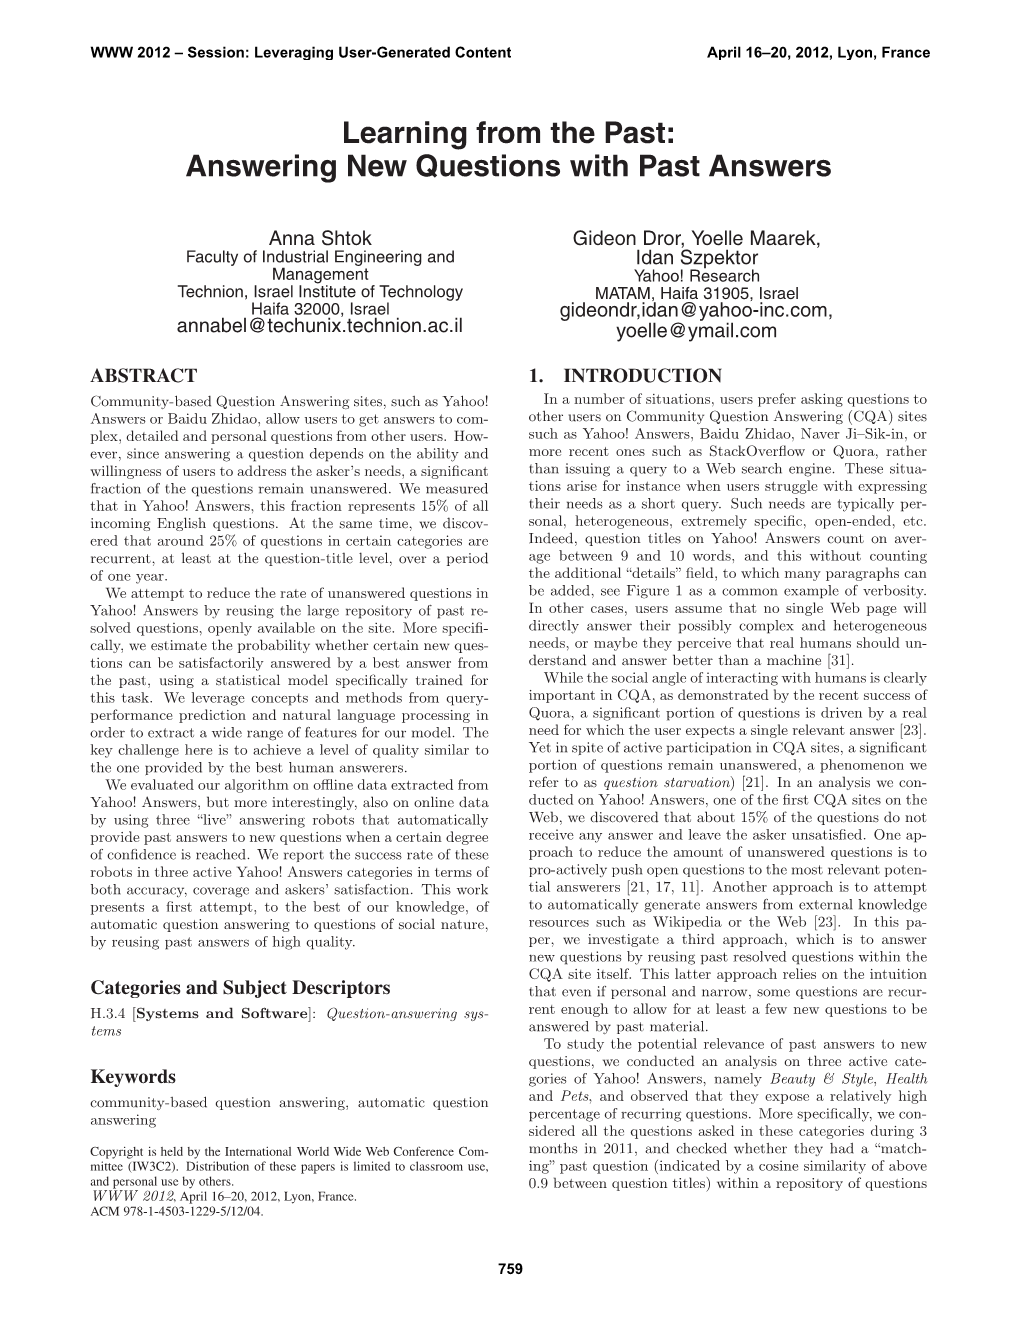 Learning from the Past: Answering New Questions with Past Answers